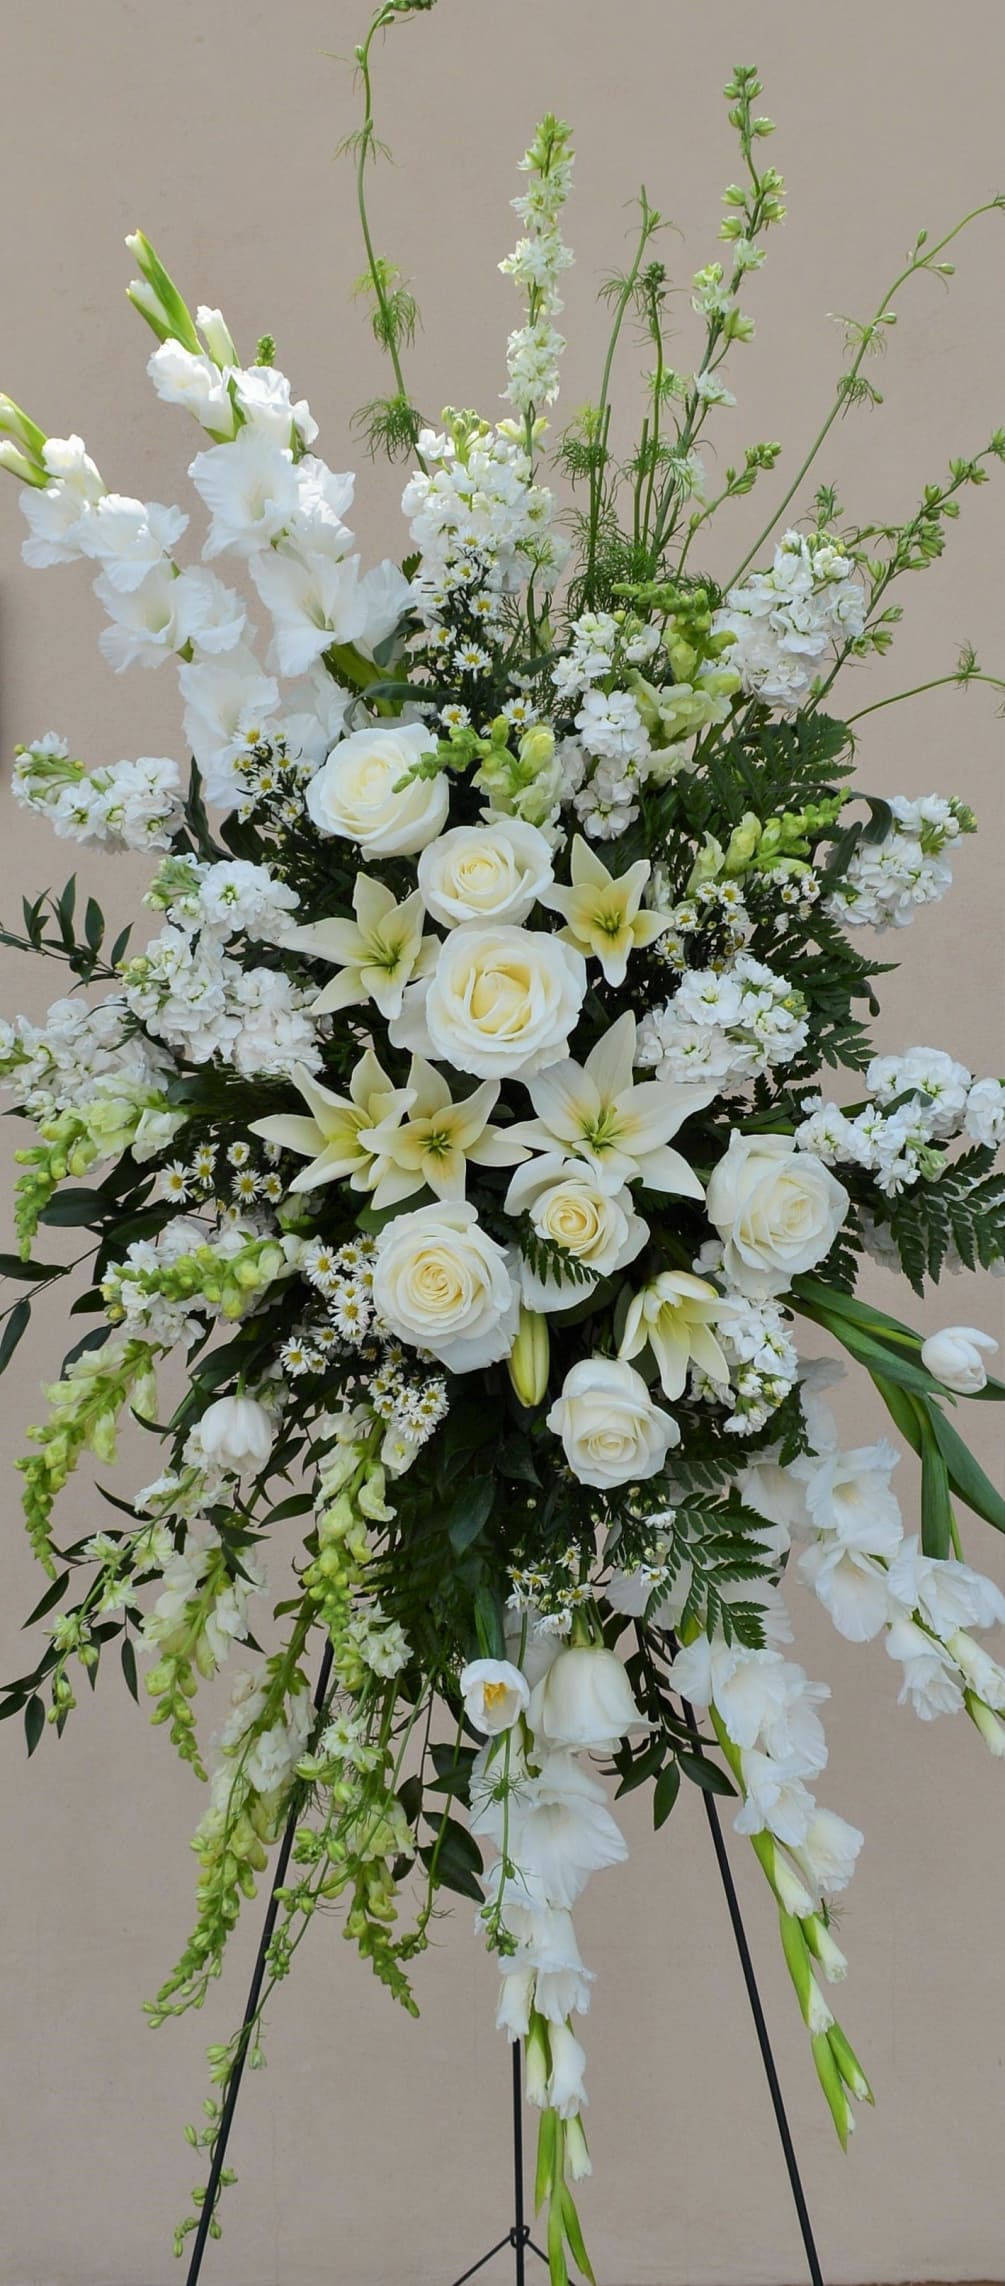 A classic combination of high quality blooms, roses, lilies, stock and gladiolas